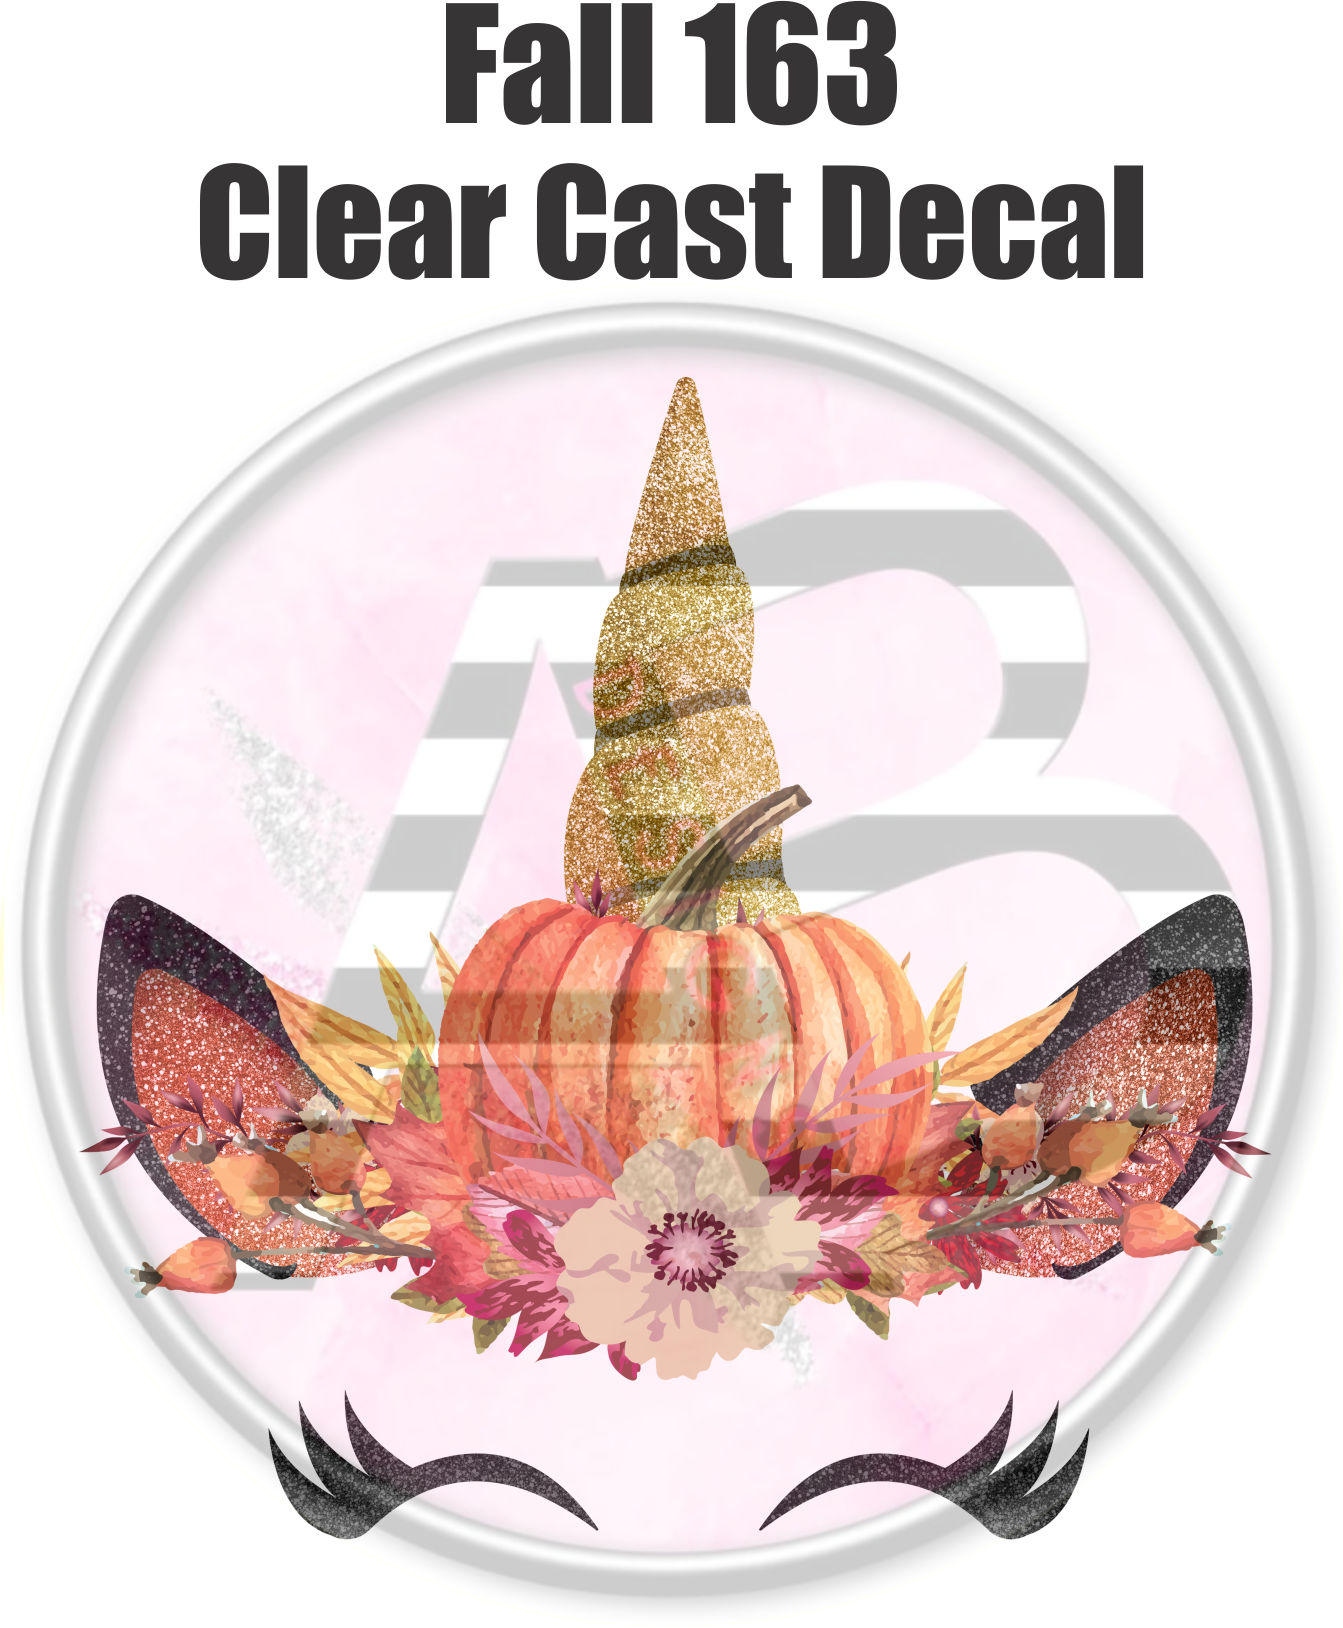 Fall 163 - Clear Cast Decal